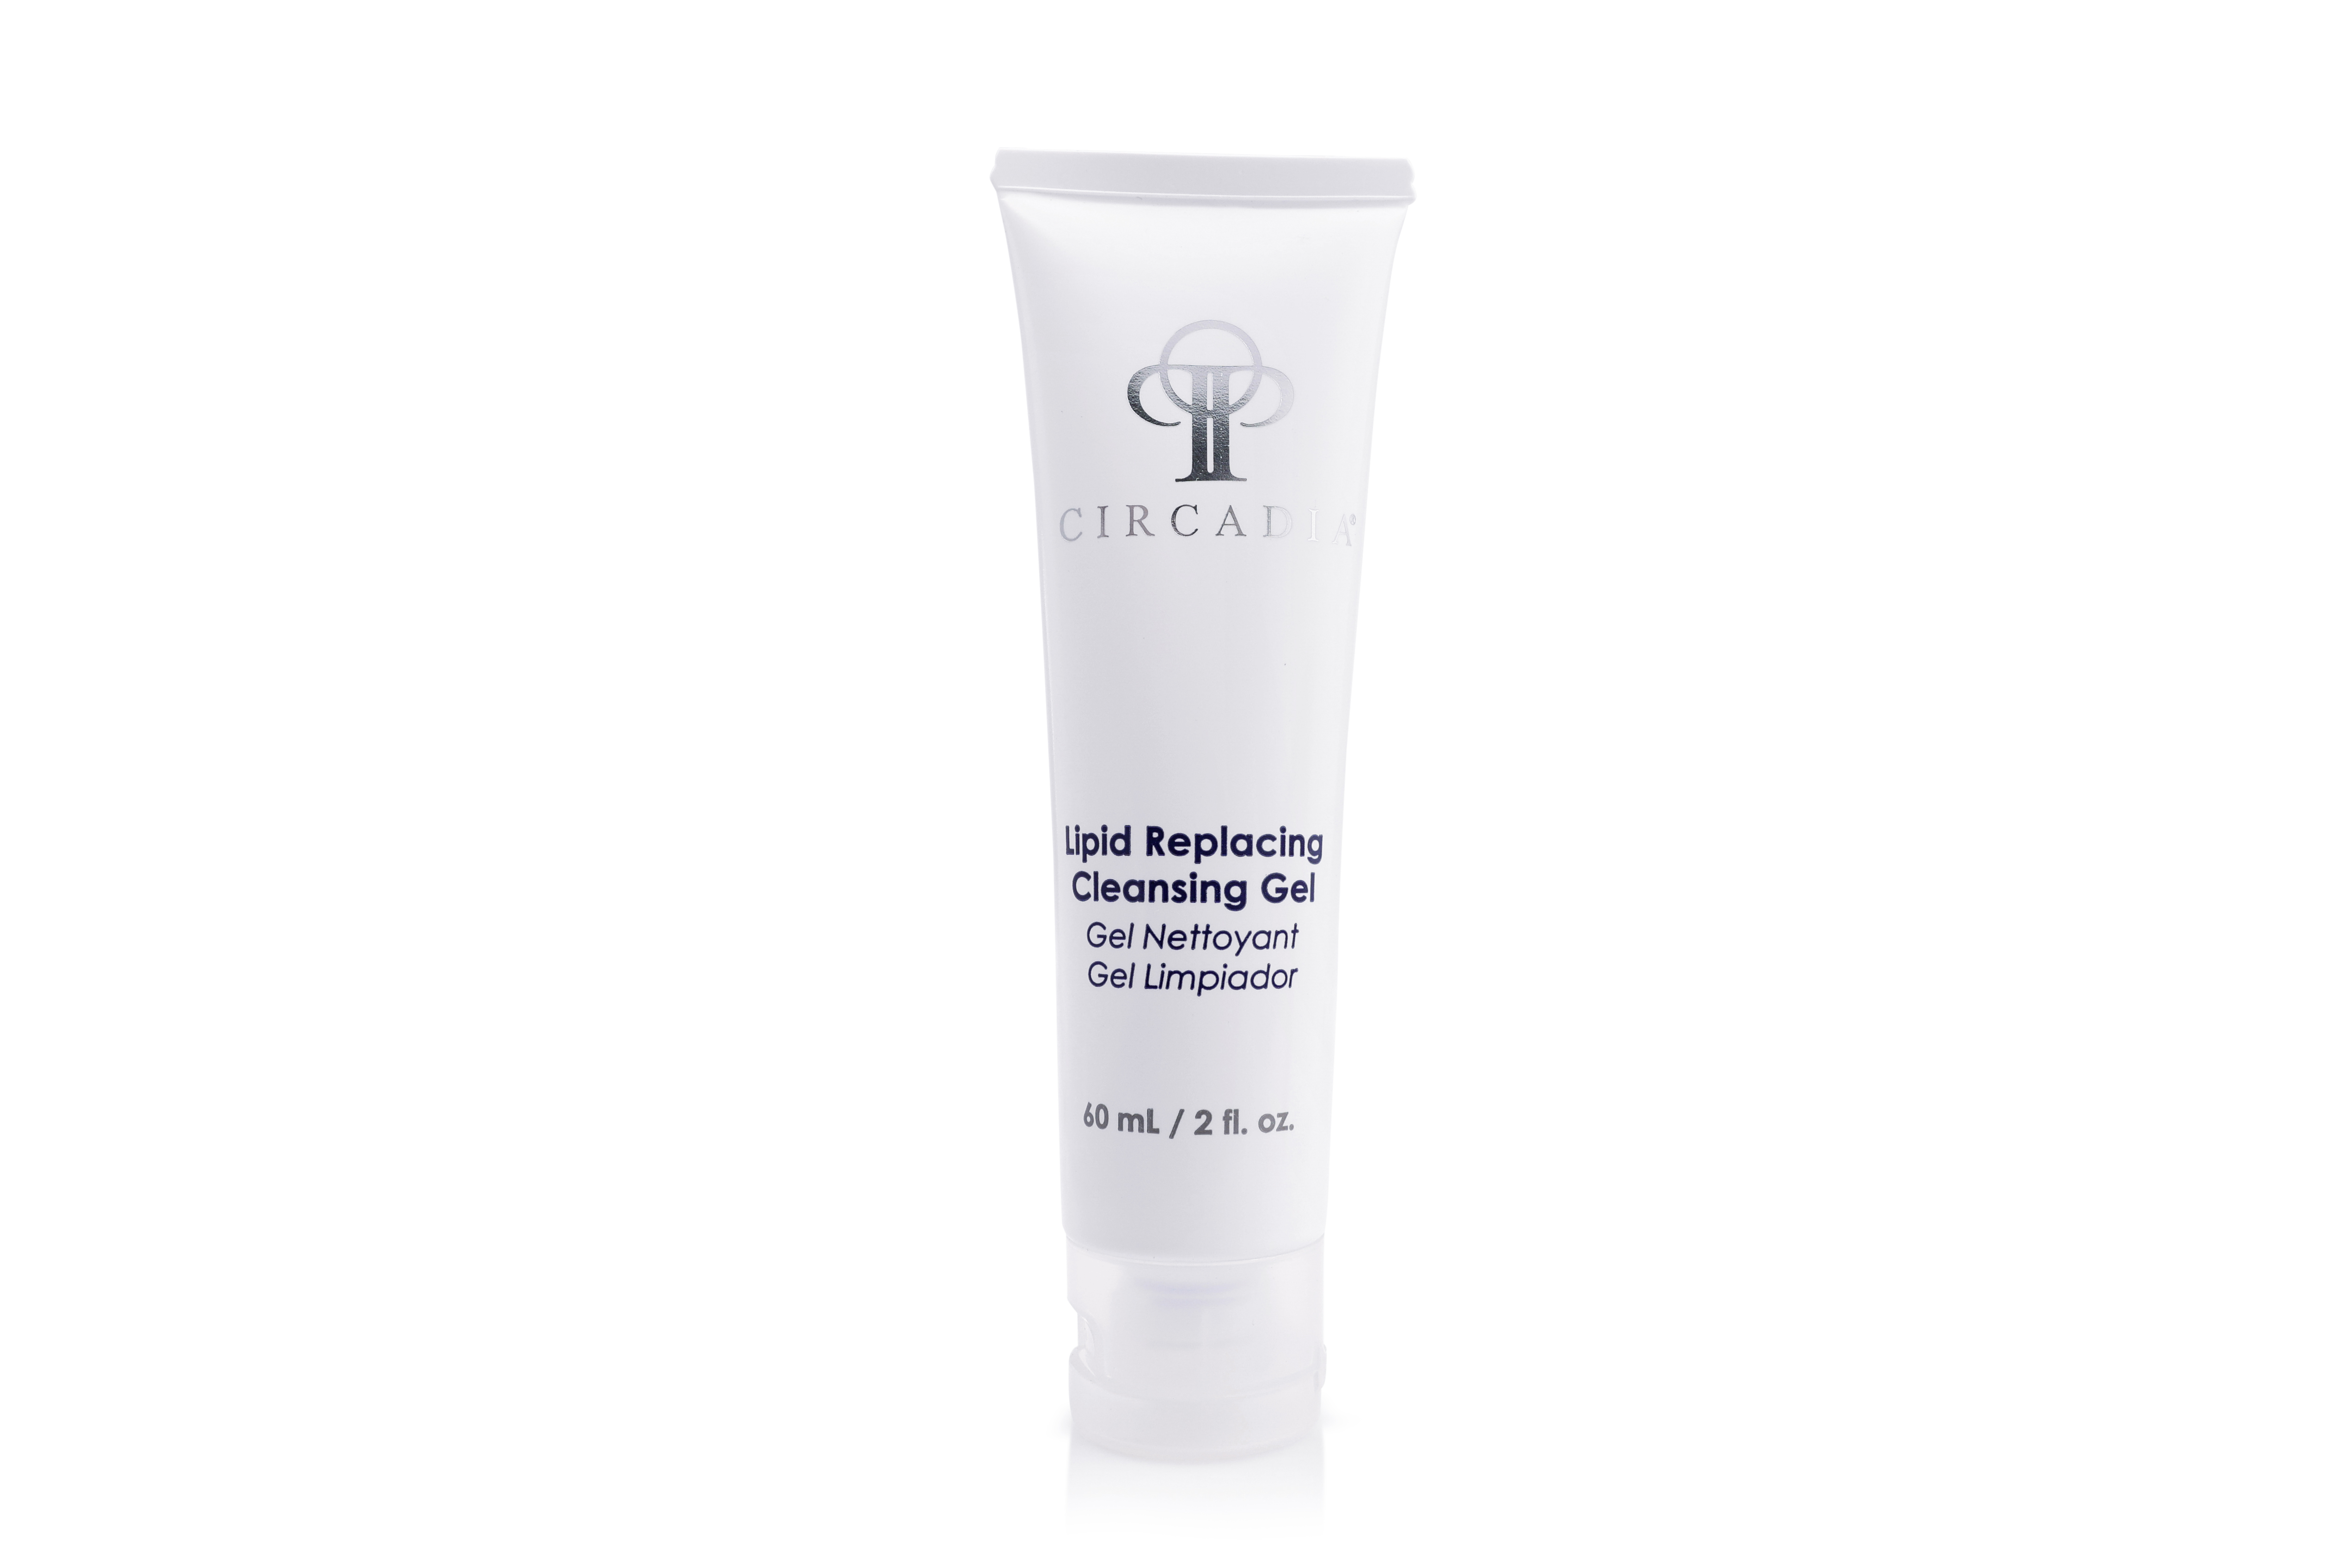 Lipid Replacing Cleansing Gel, Travelsize